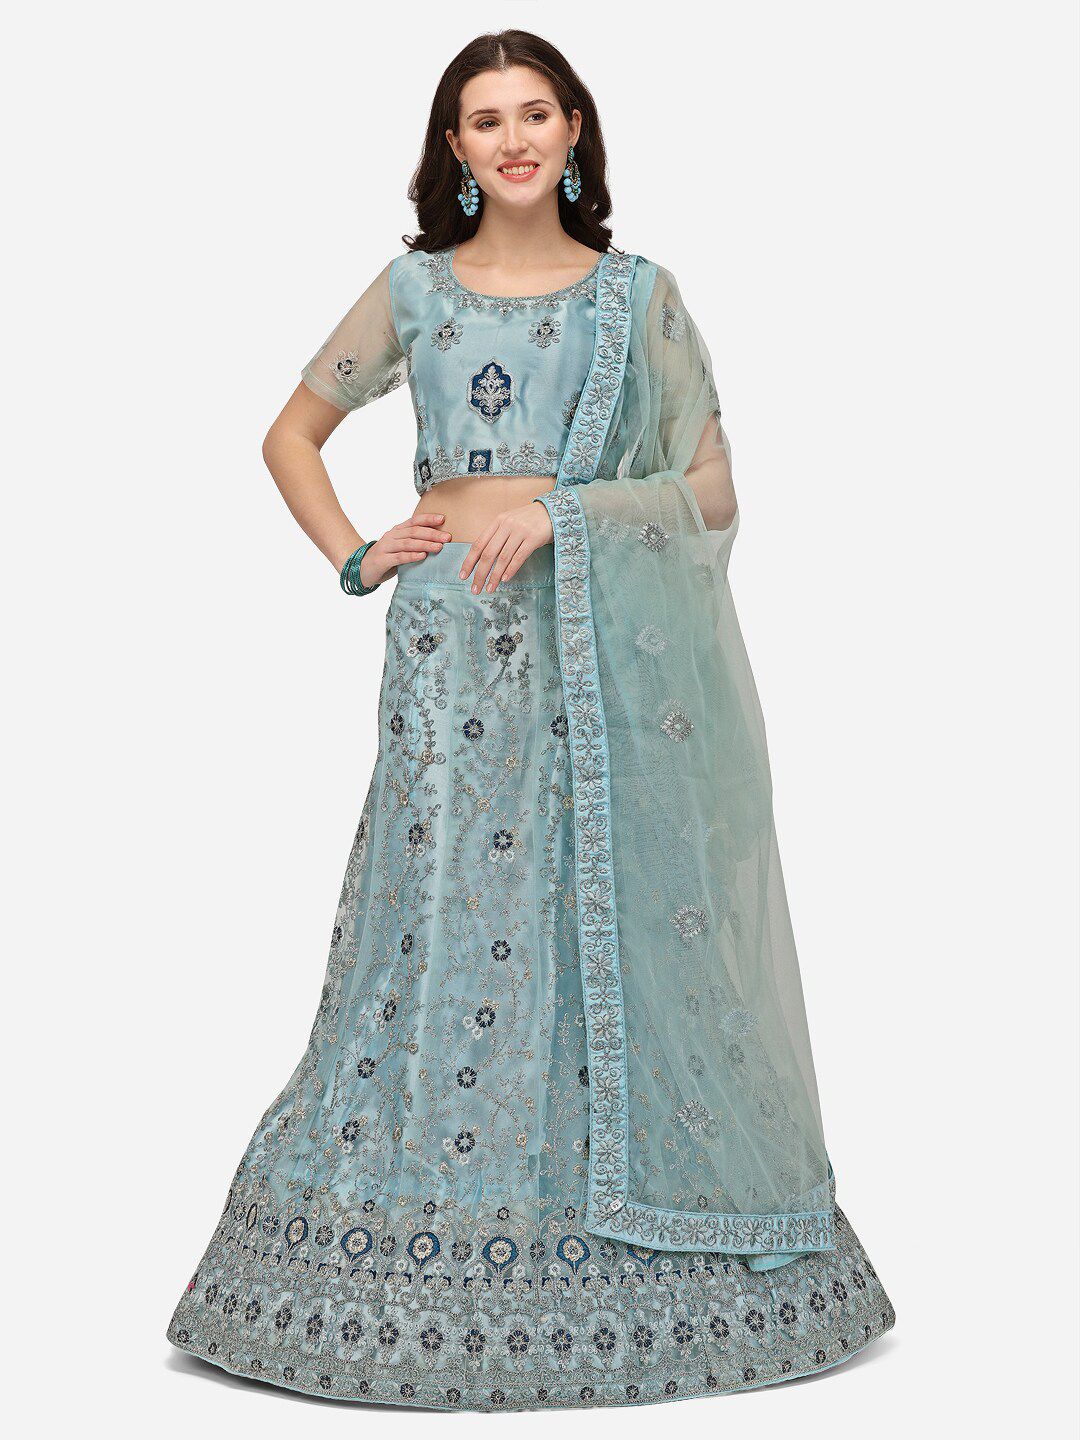 VRSALES Turquoise Blue Embroidered Semi-Stitched Lehenga & Unstitched Blouse With Dupatta Price in India